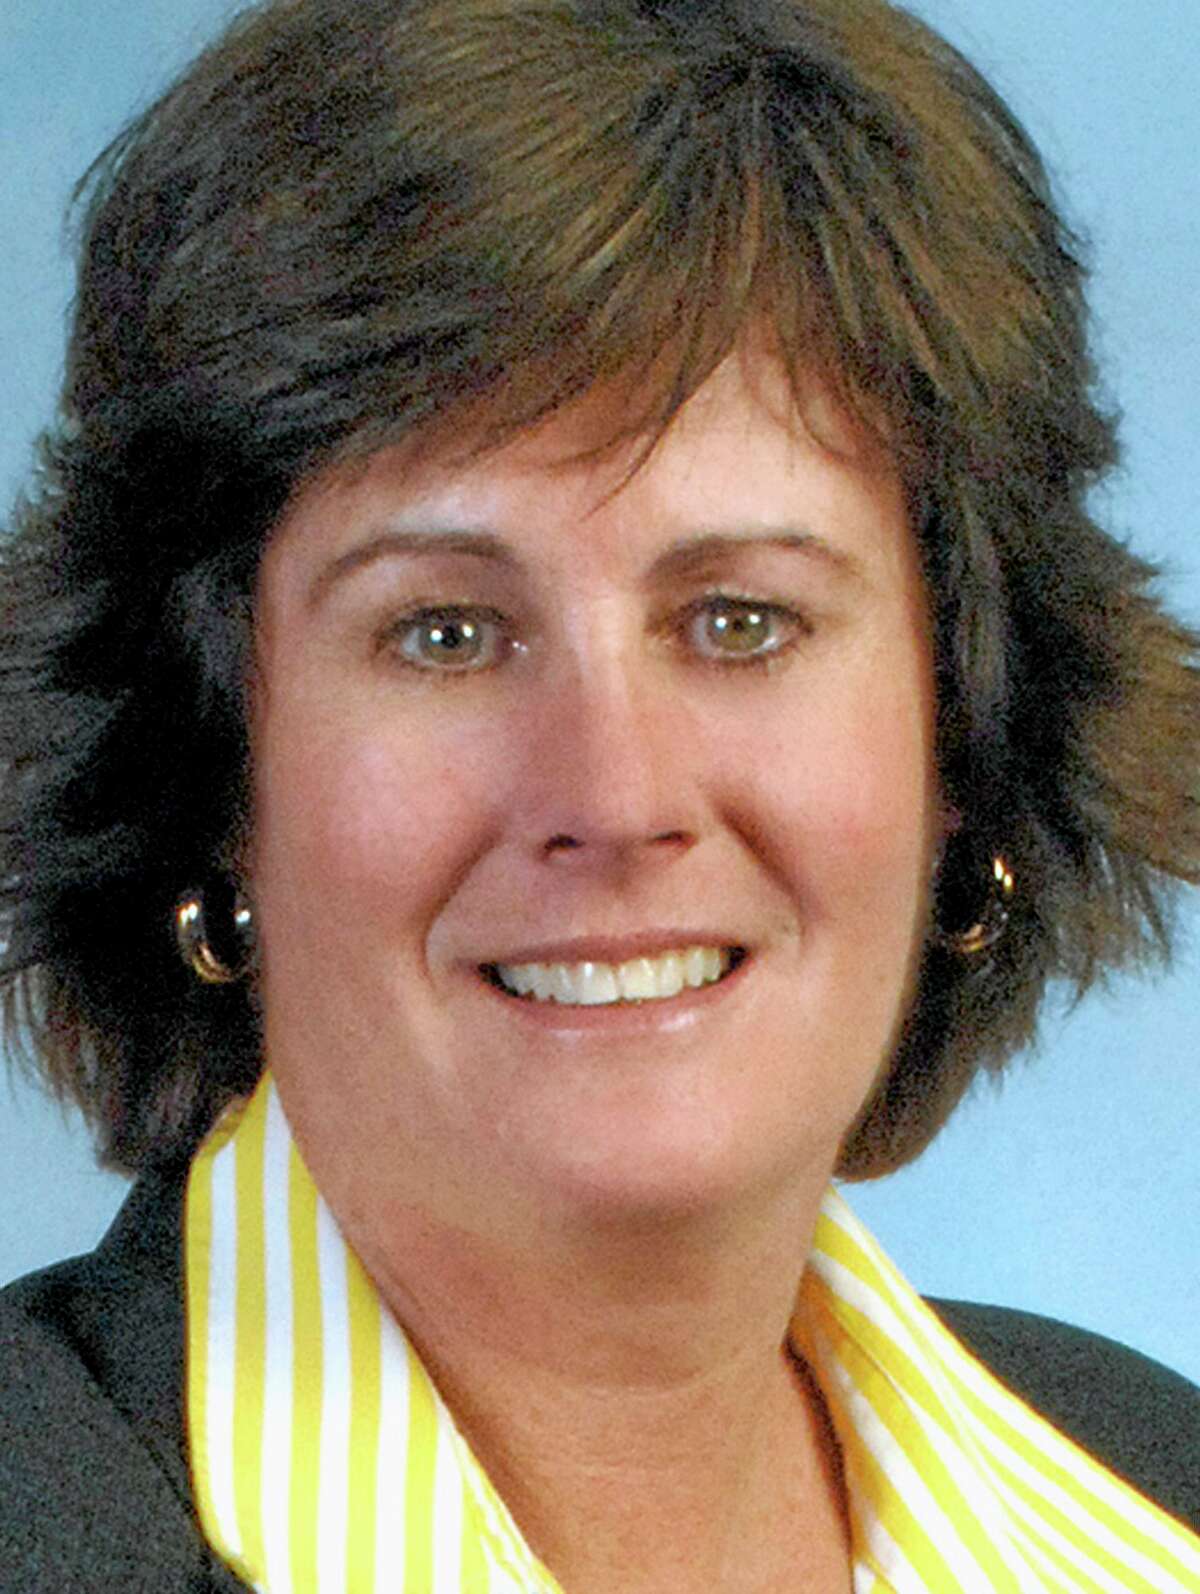 An undated photo released by the Federal Bureau of Investigation shows Patricia M. Ferrick, appointed in September 2013 as special agent in charge of the FBI's New Haven, Conn., Division. In an interview with the The Associated Press Wednesday, Jan. 15, 2014, Ferrick said that investigating public corruption is a top priority for her. (AP Photo/Federal Bureau of Investigation)